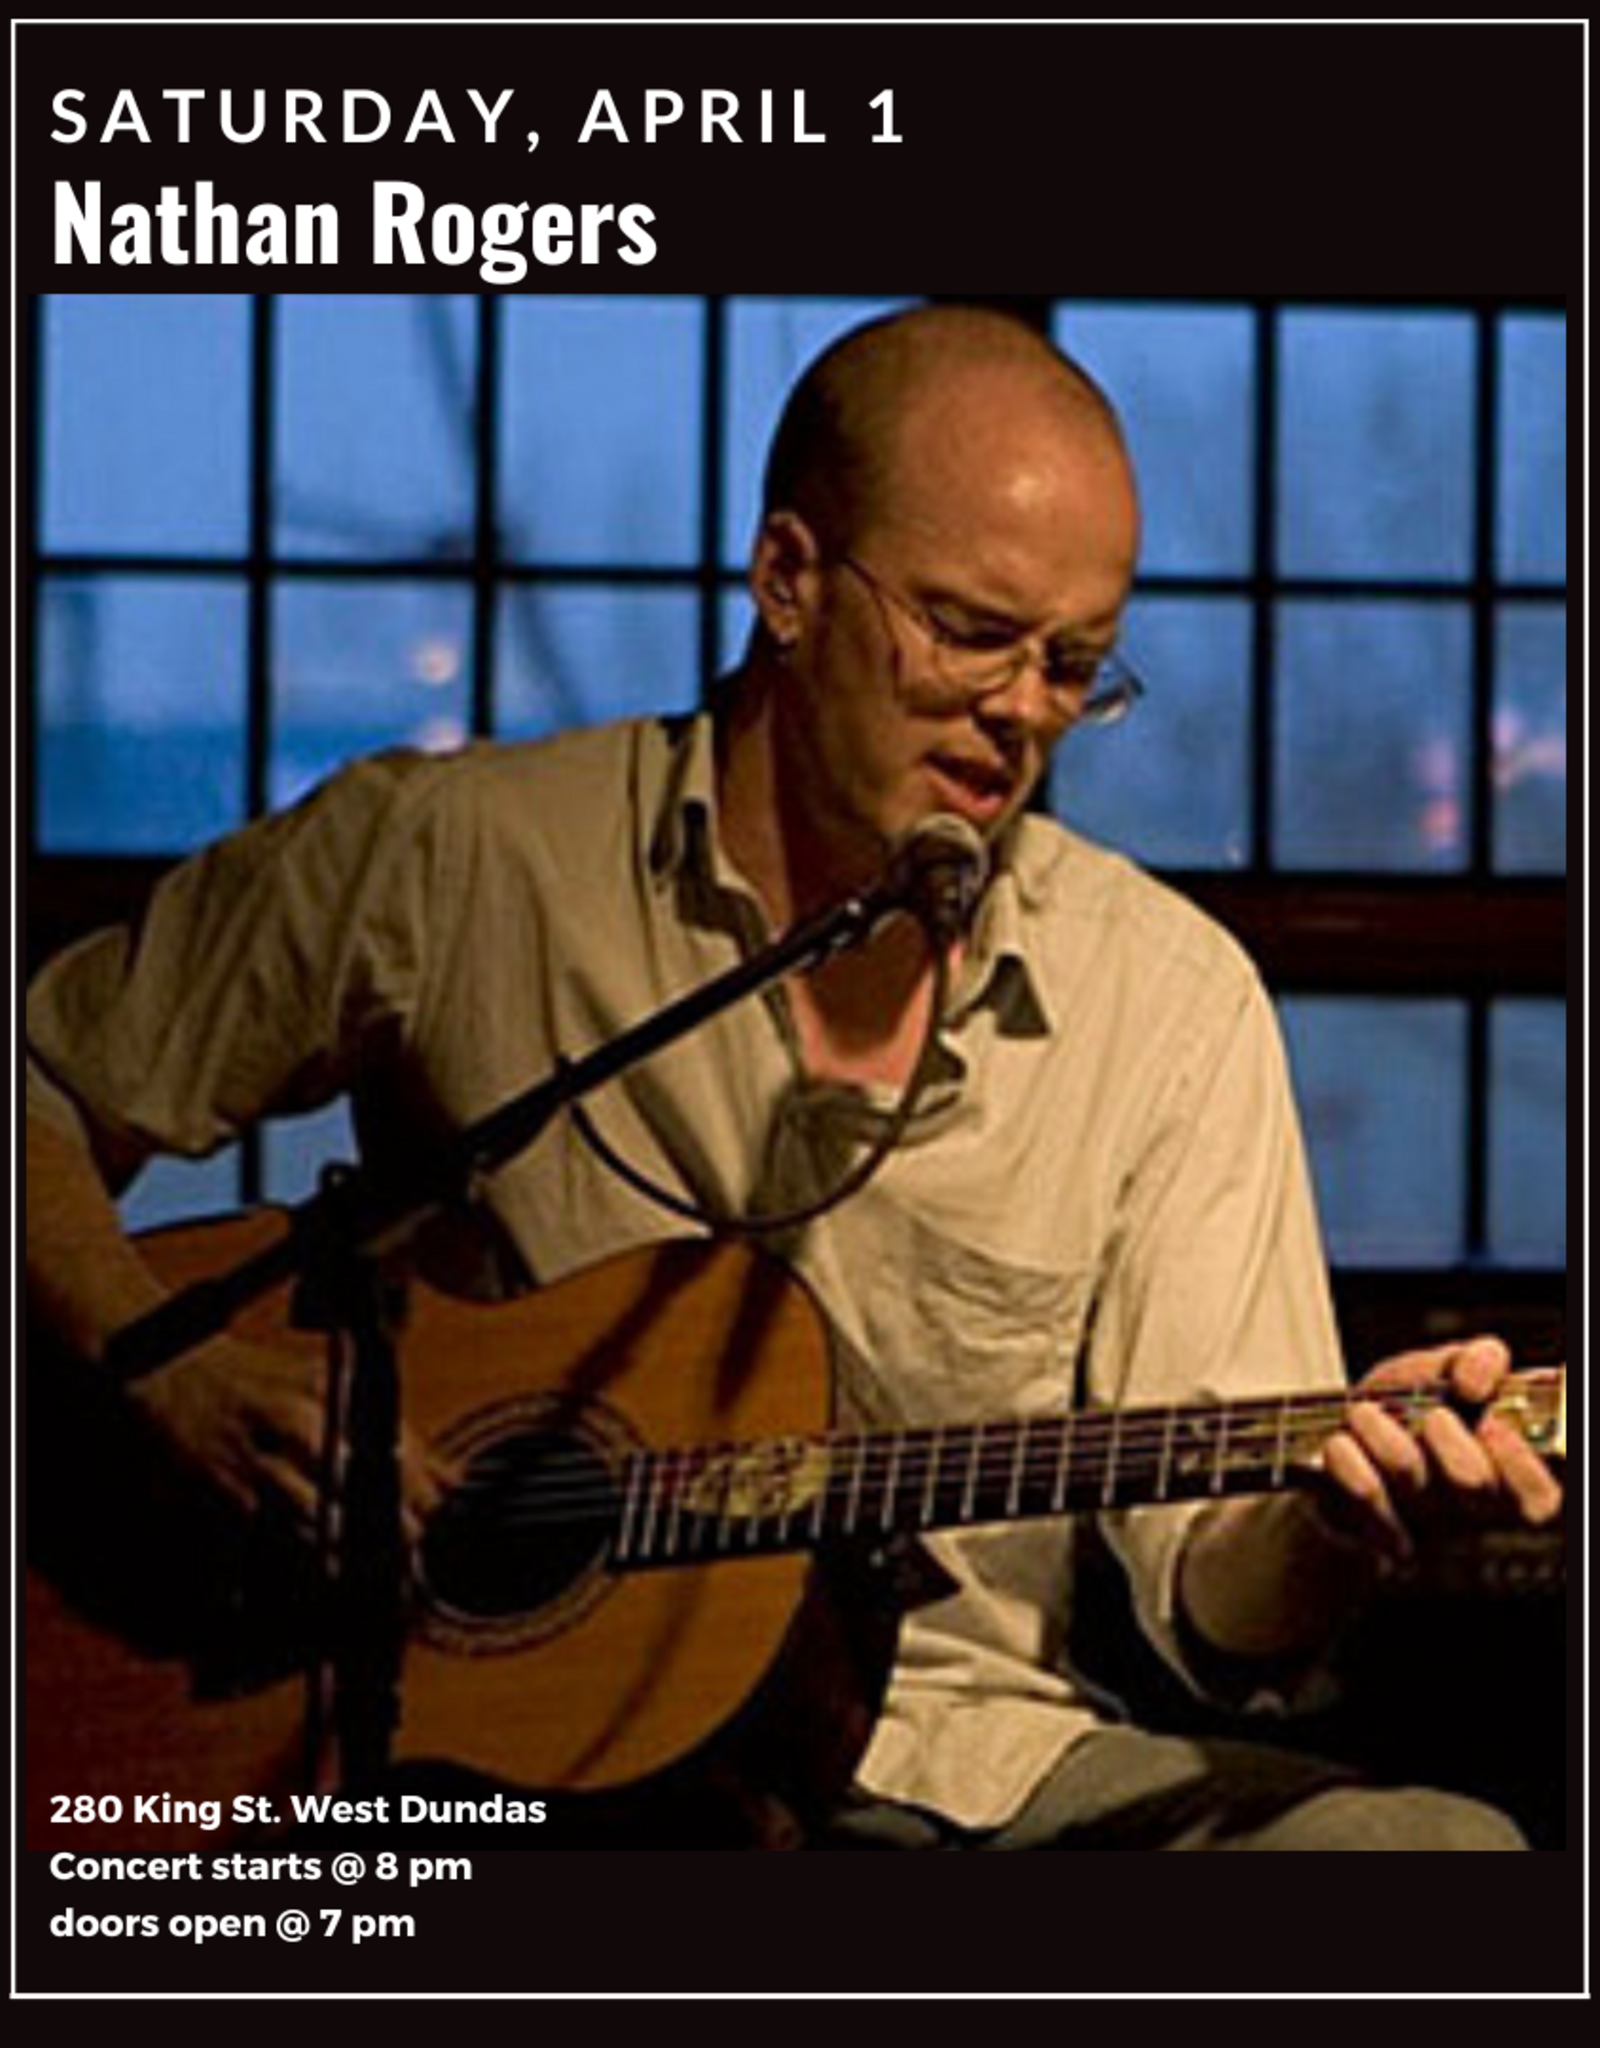 Nathan Rogers Concert